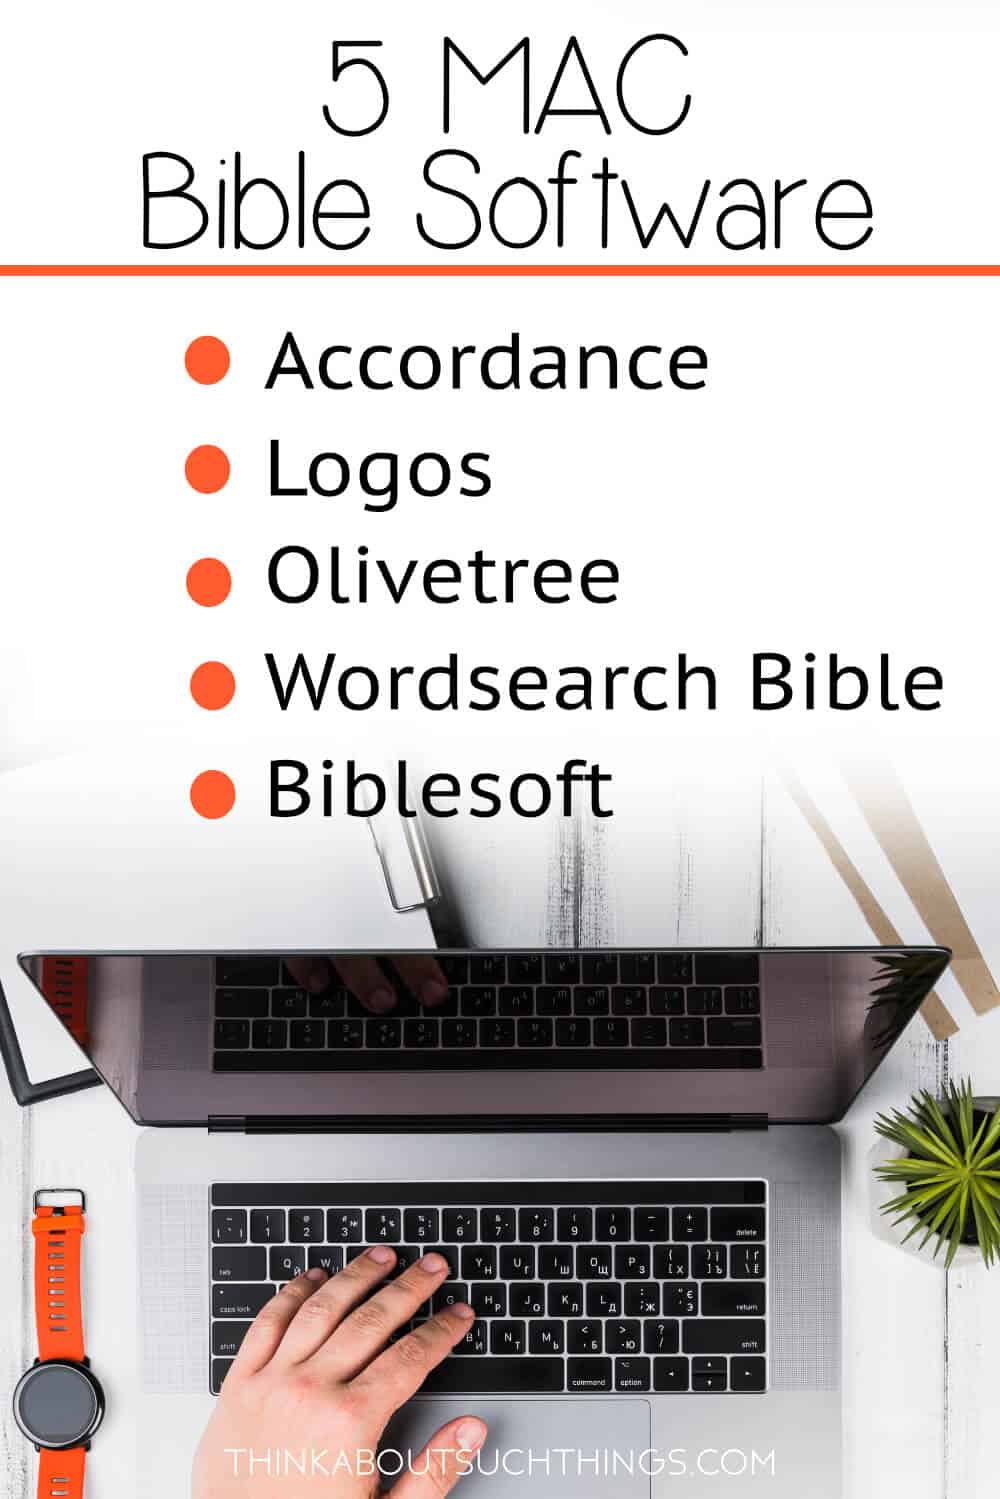 bible software for mac computers